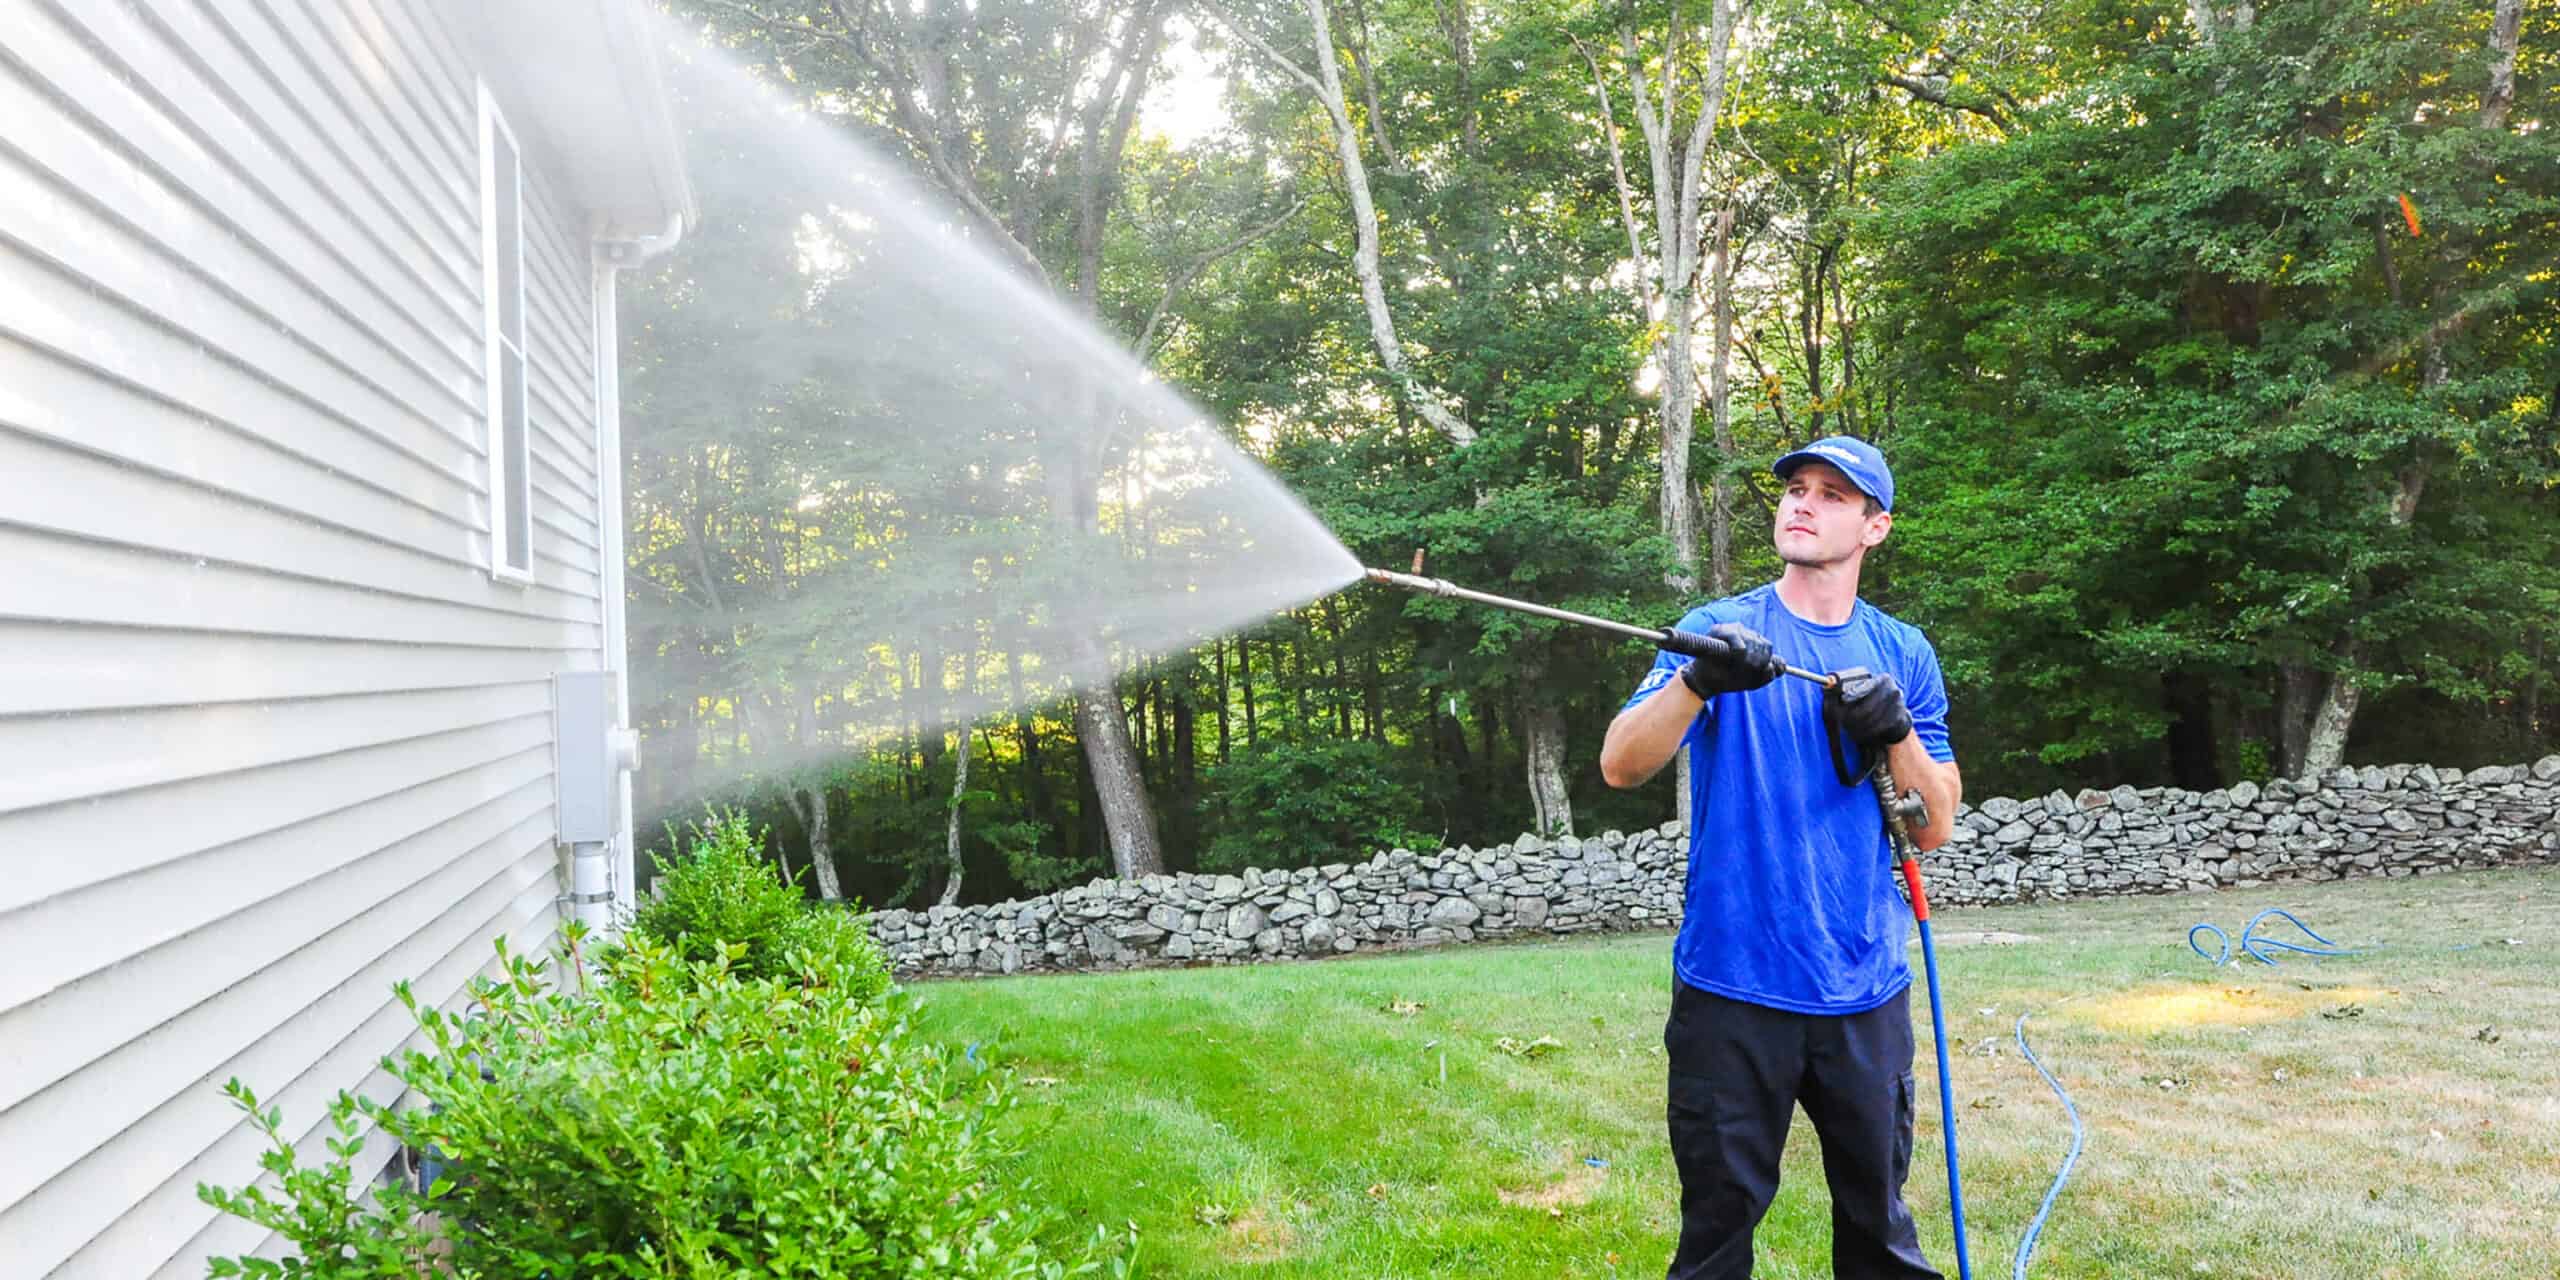 Pressure Washing Services In Fresno: 7 Unexpected Uses